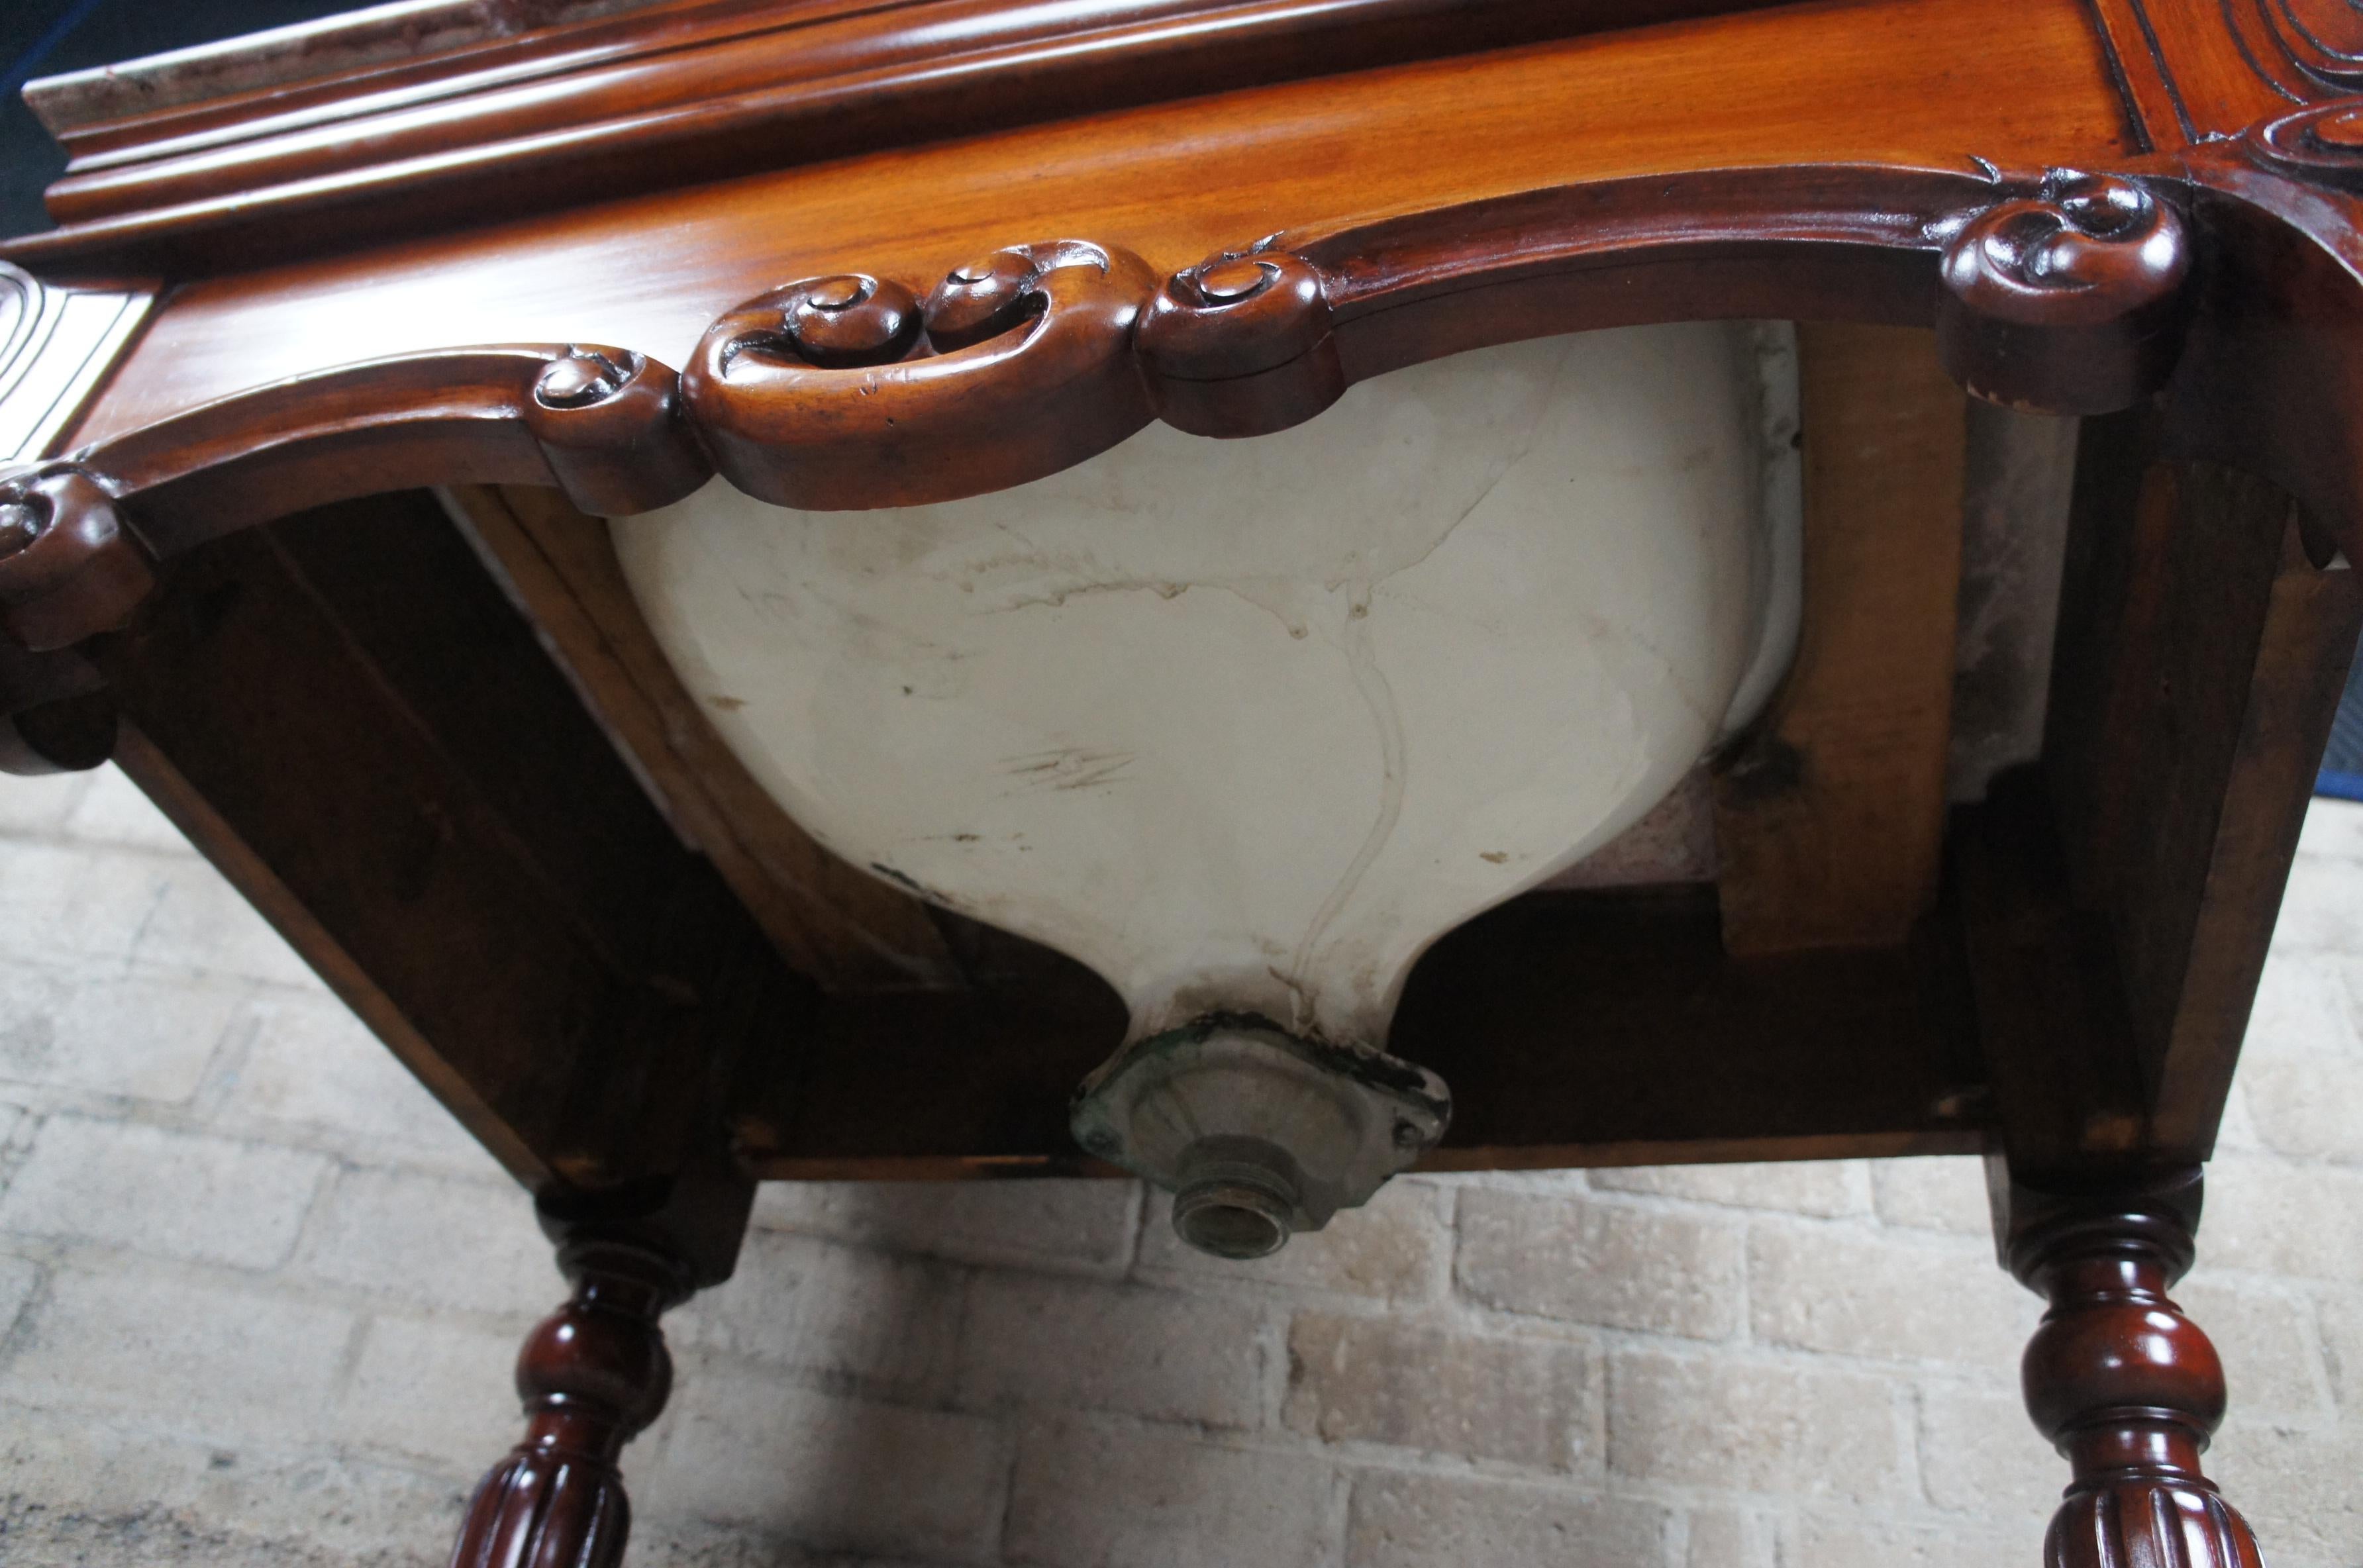 Rare Antique French Victorian Mahogany Marble Top Bathroom Vanity Porcelain Sink For Sale 7